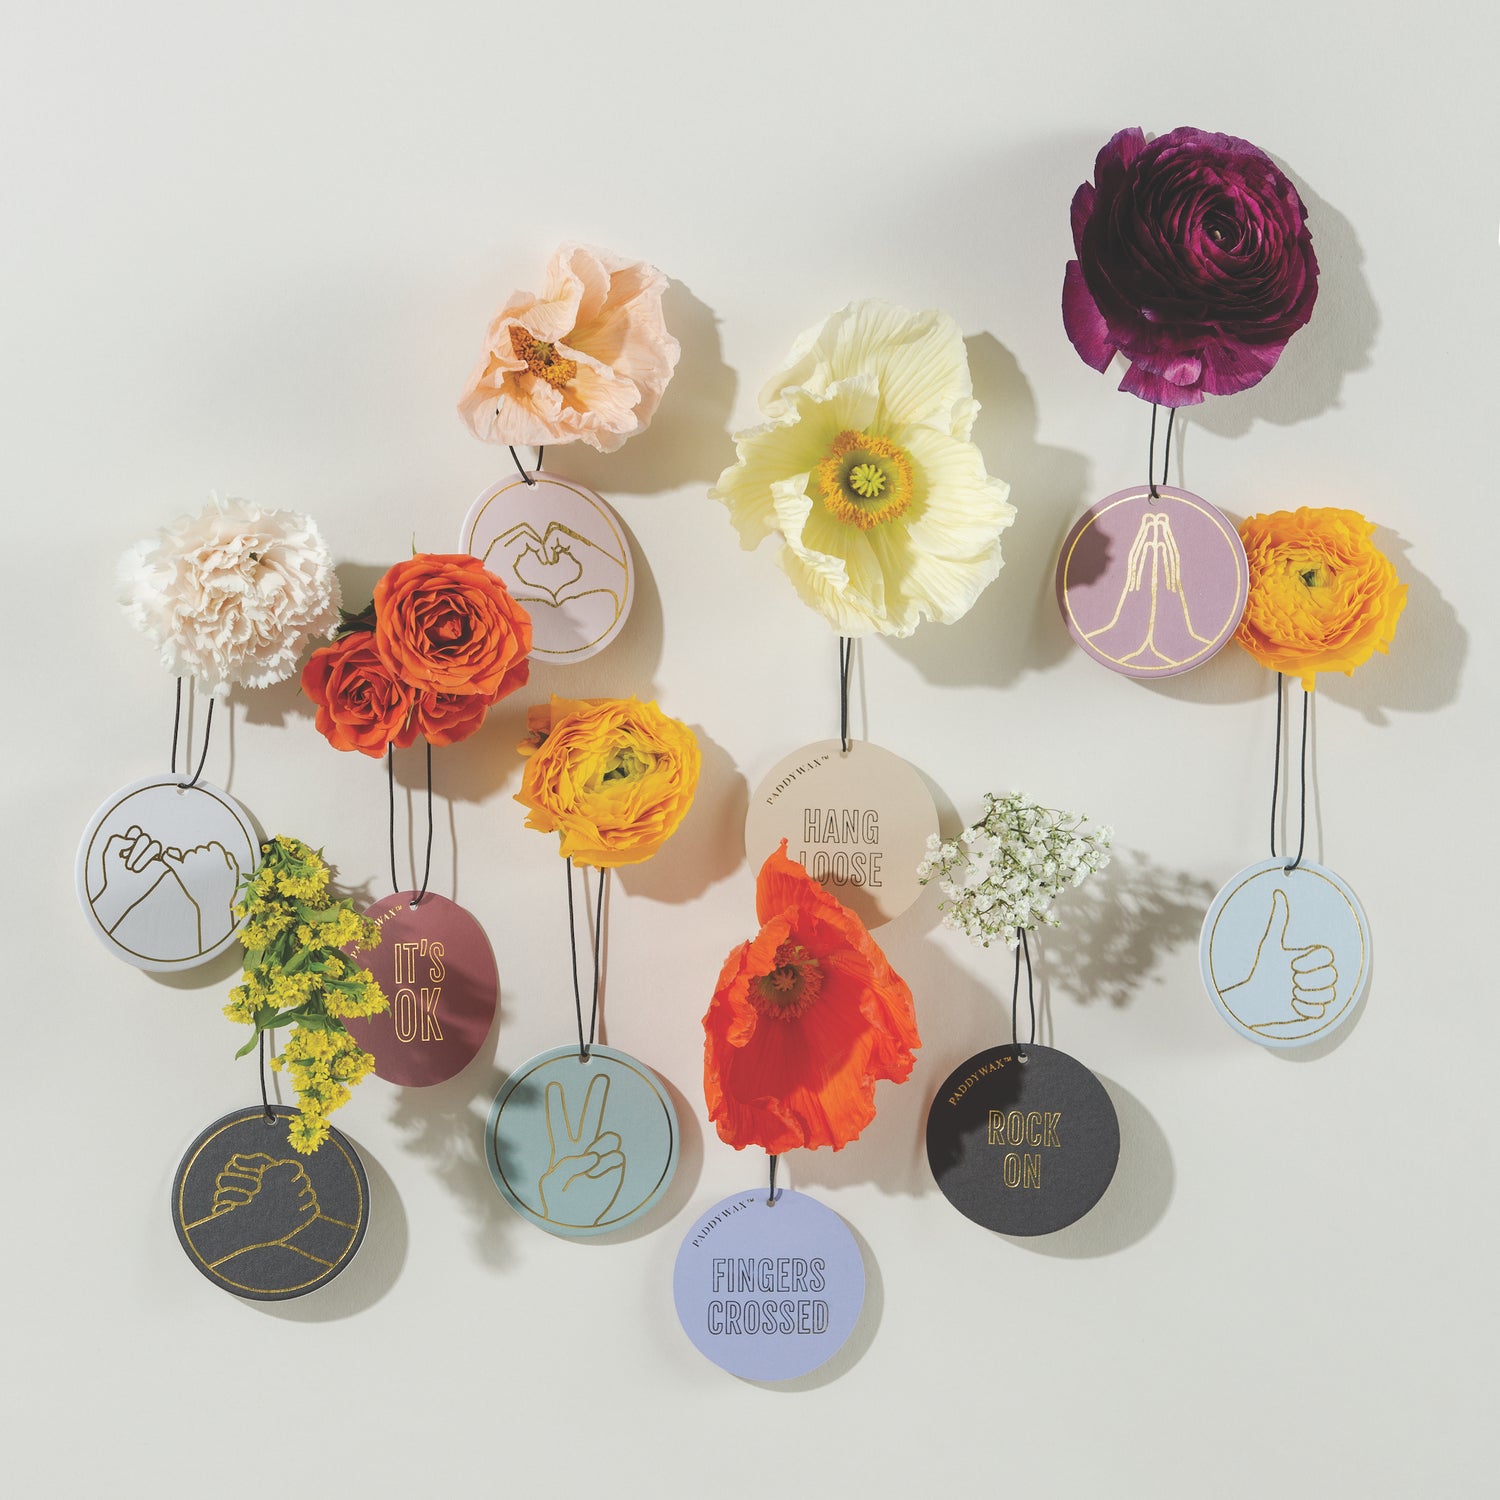 Impressions car fragrances hanging wall with florals around them